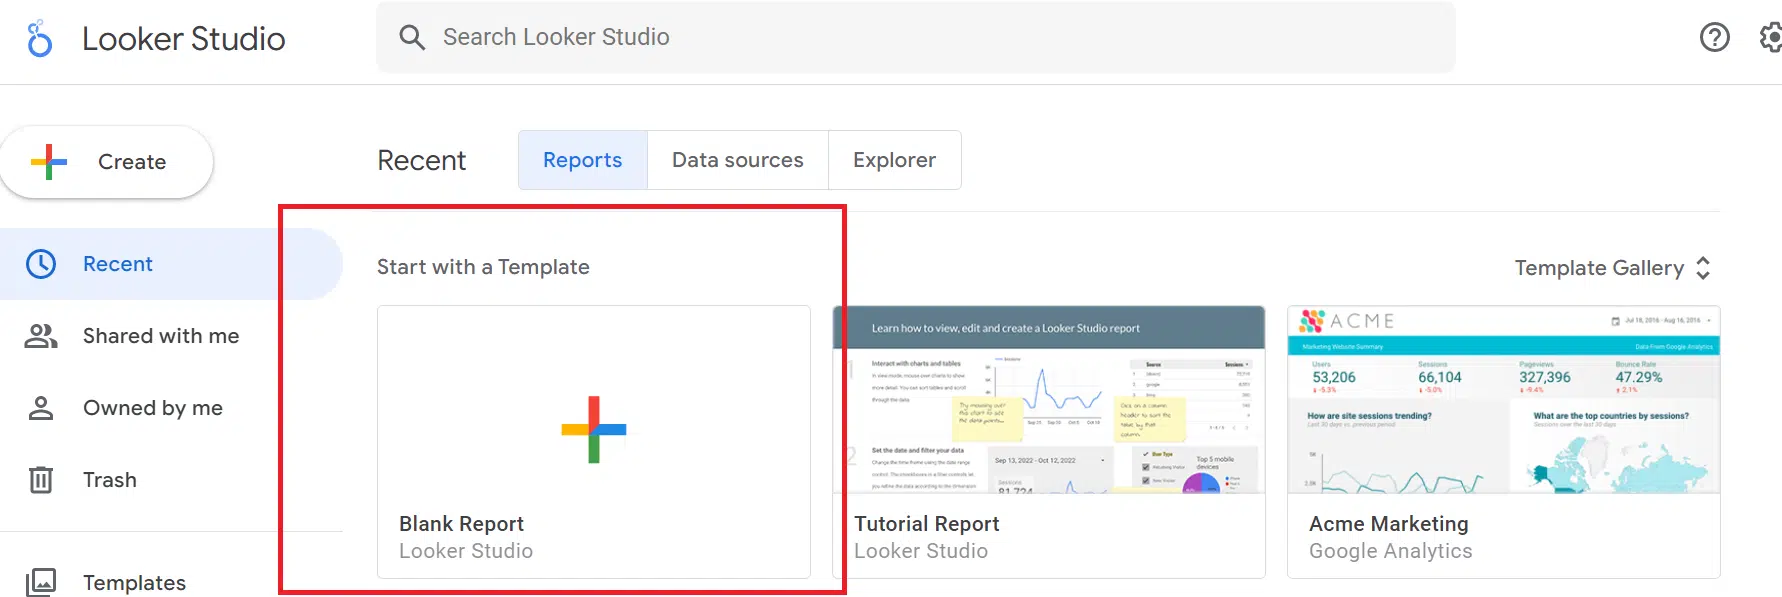 Looker Studio and create a blank report